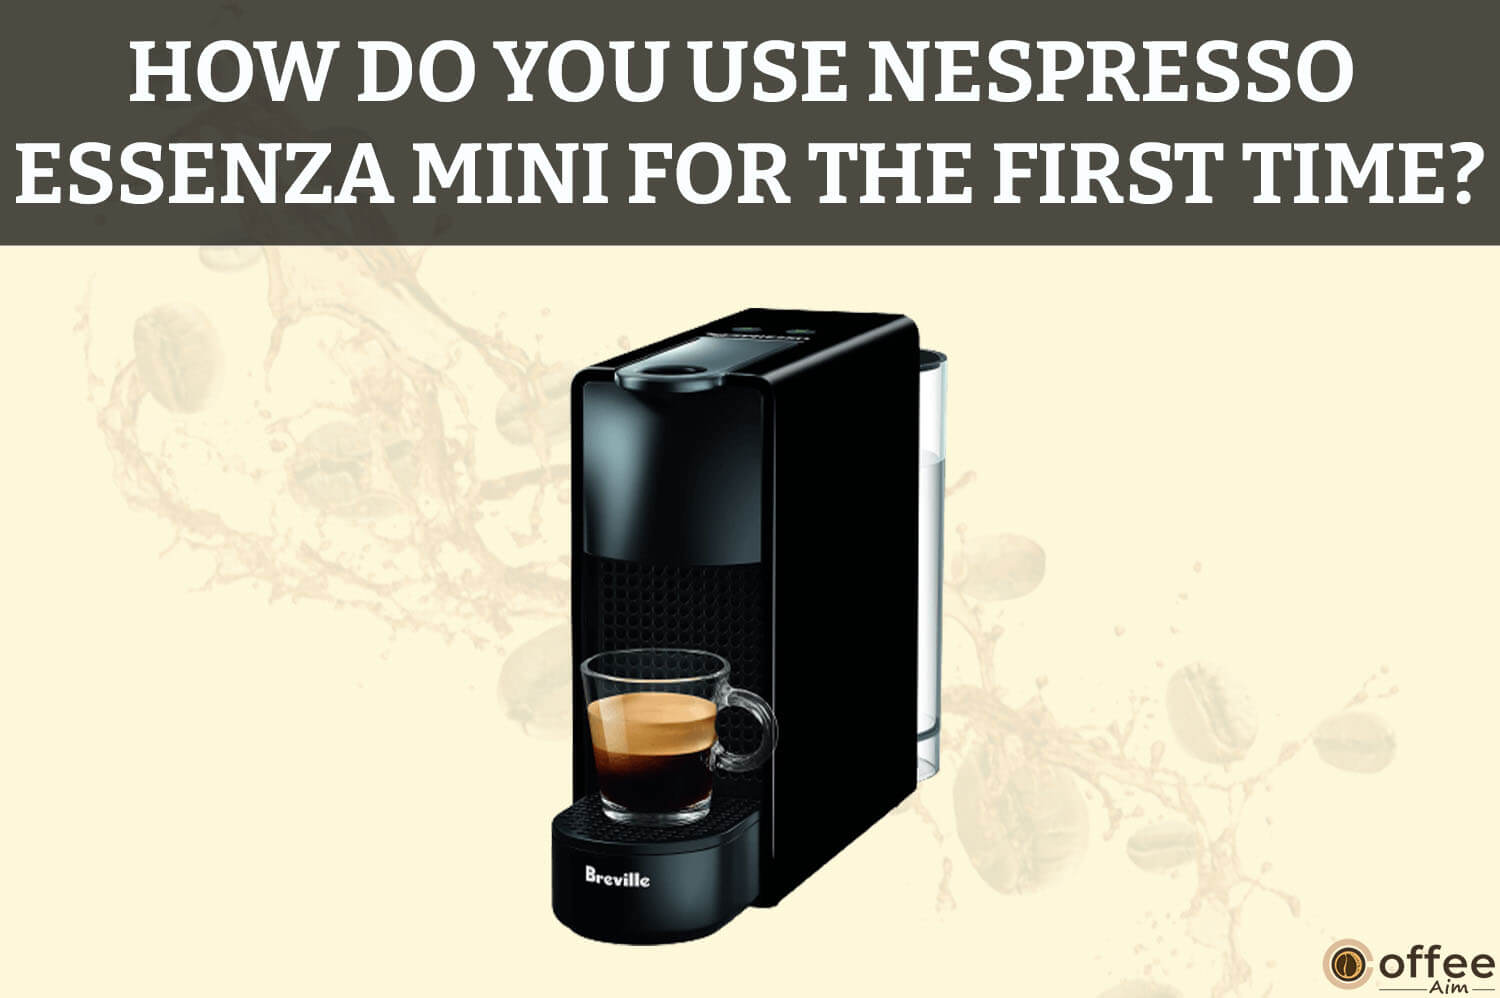 Featured image for the article "How Do You Use Nespresso Essenza Mini For The First Time"